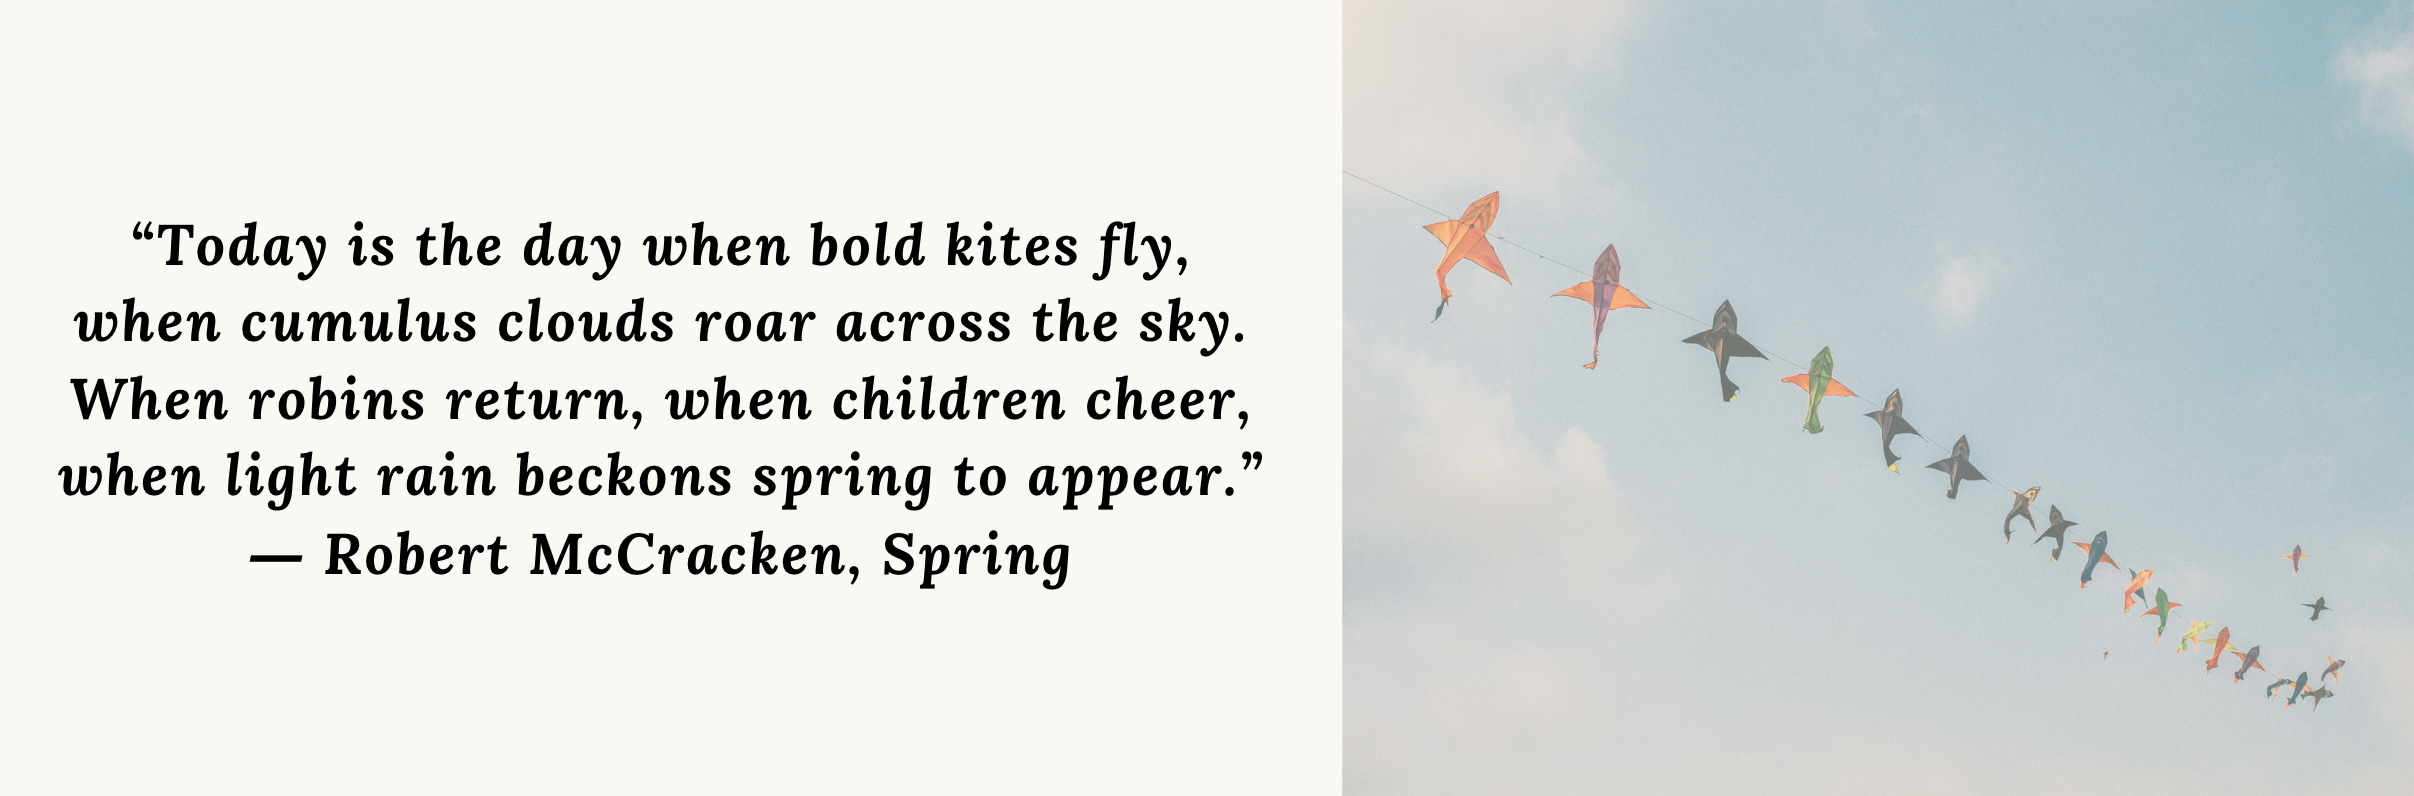 “Today is the day when bold kites fly,<br />
when cumulus clouds roar across the sky.<br />
When robins return, when children cheer,<br />
when light rain beckons spring to appear.”<br />
― Robert McCracken, Spring